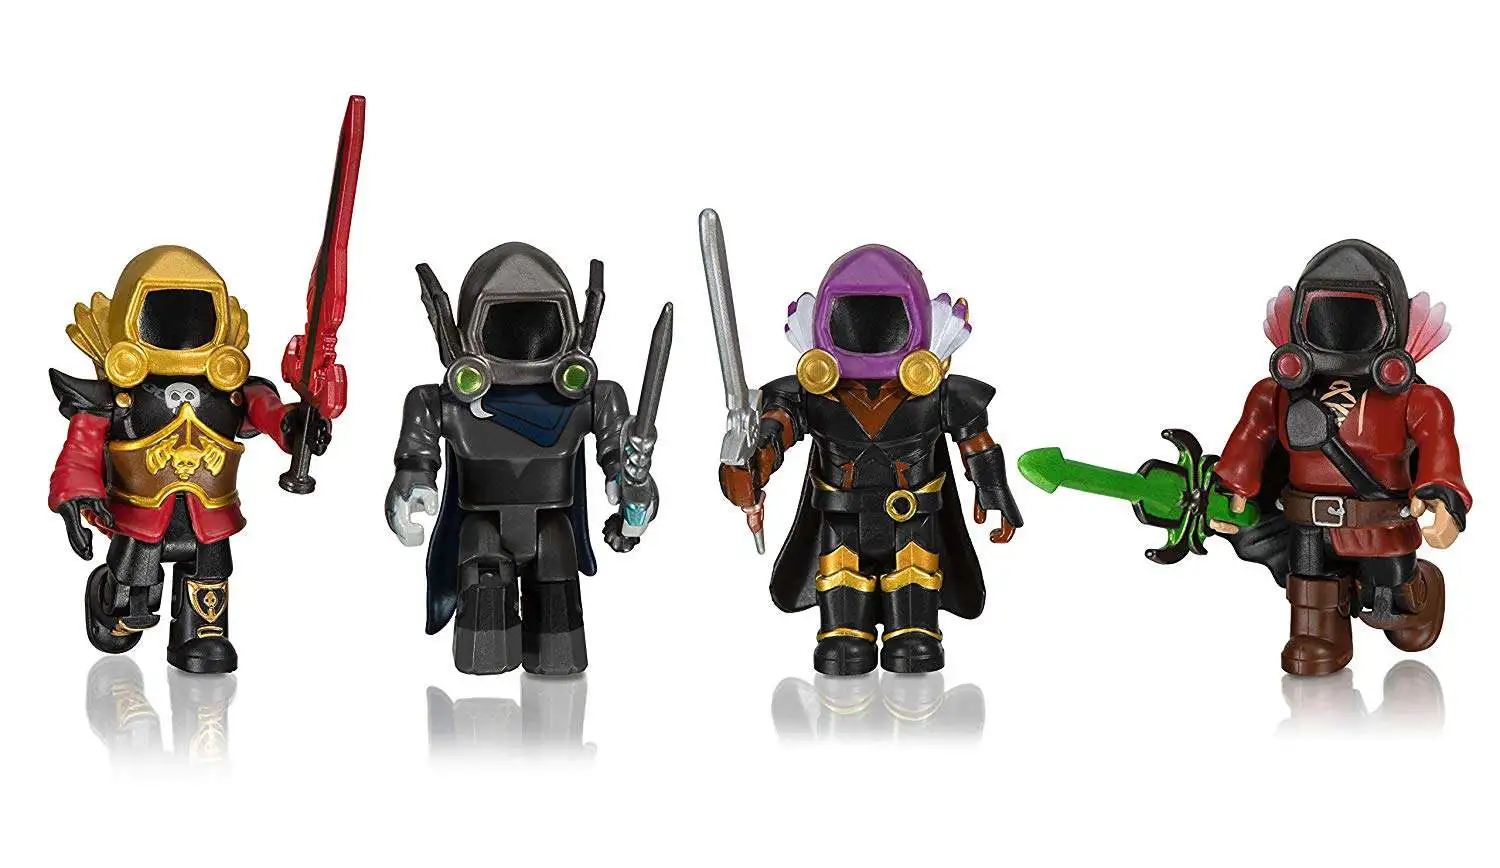 Roblox Action Collection - Dominus Legends: Ultimate Dominus Legend Figure  Pack + Two Mystery Figure Bundle [Includes 3 Exclusive Virtual Items]